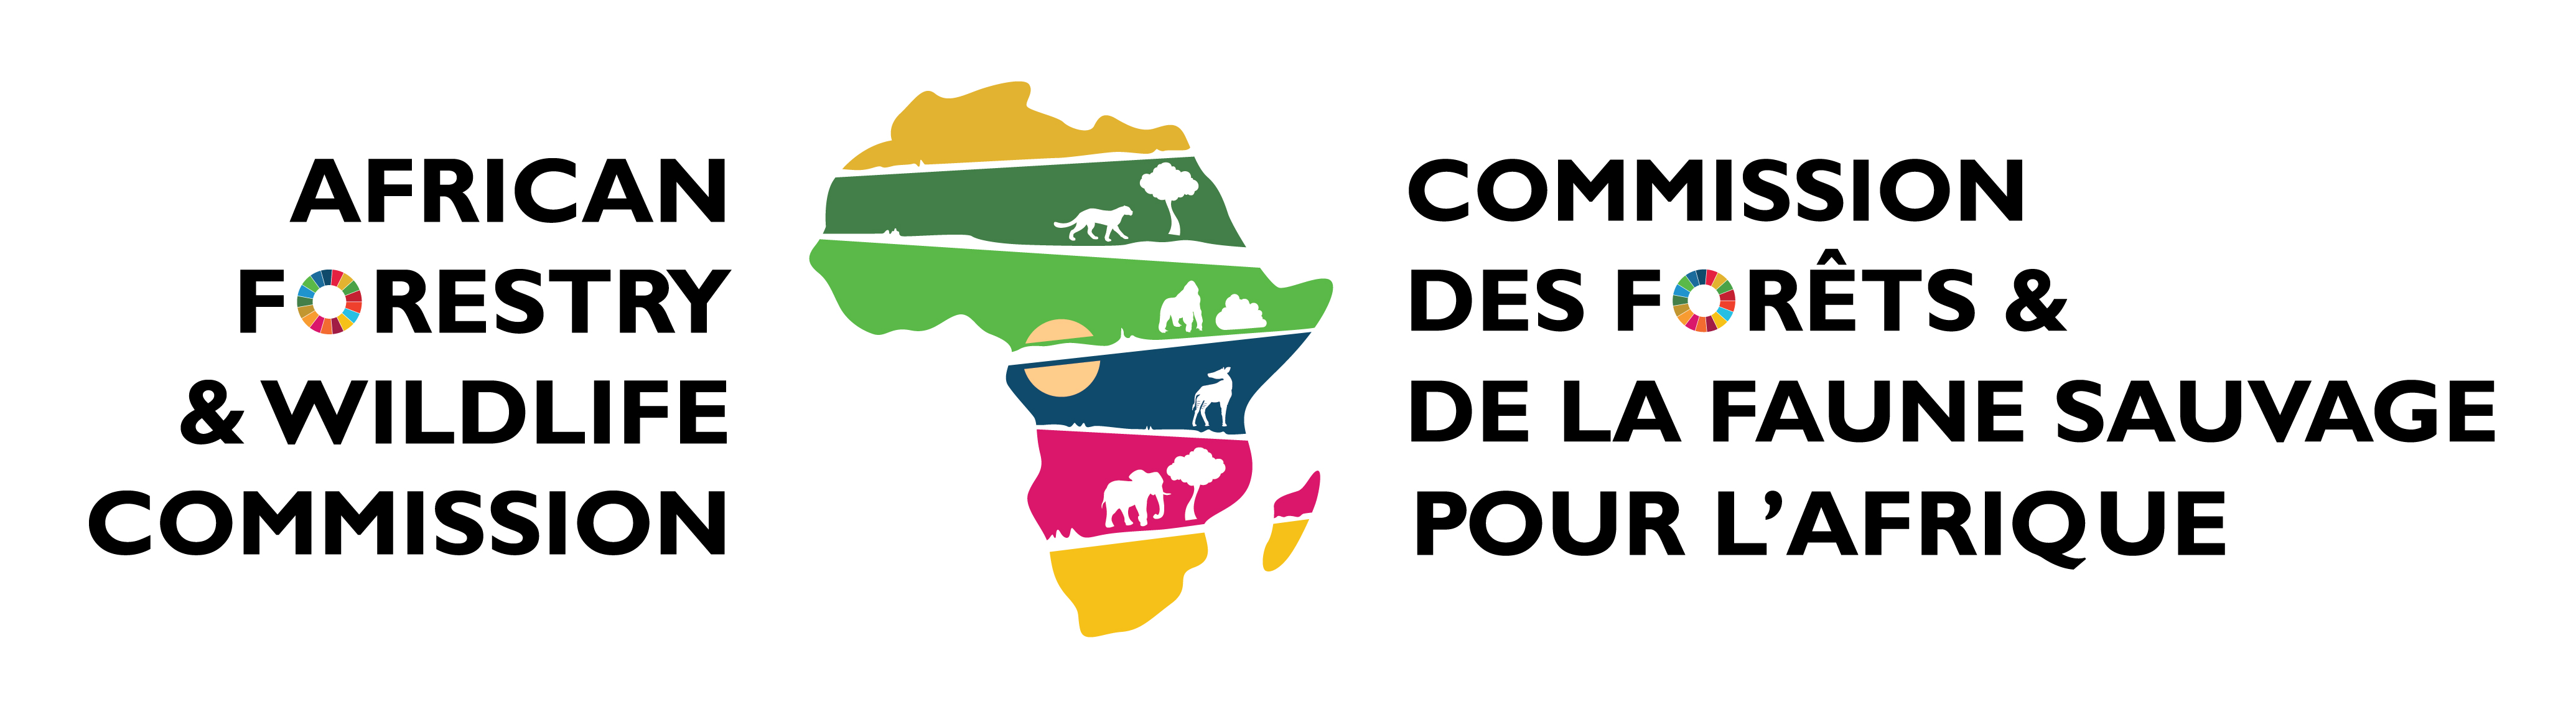 24th Session of the African Forestry and Wildlife Commission (AFWC24)